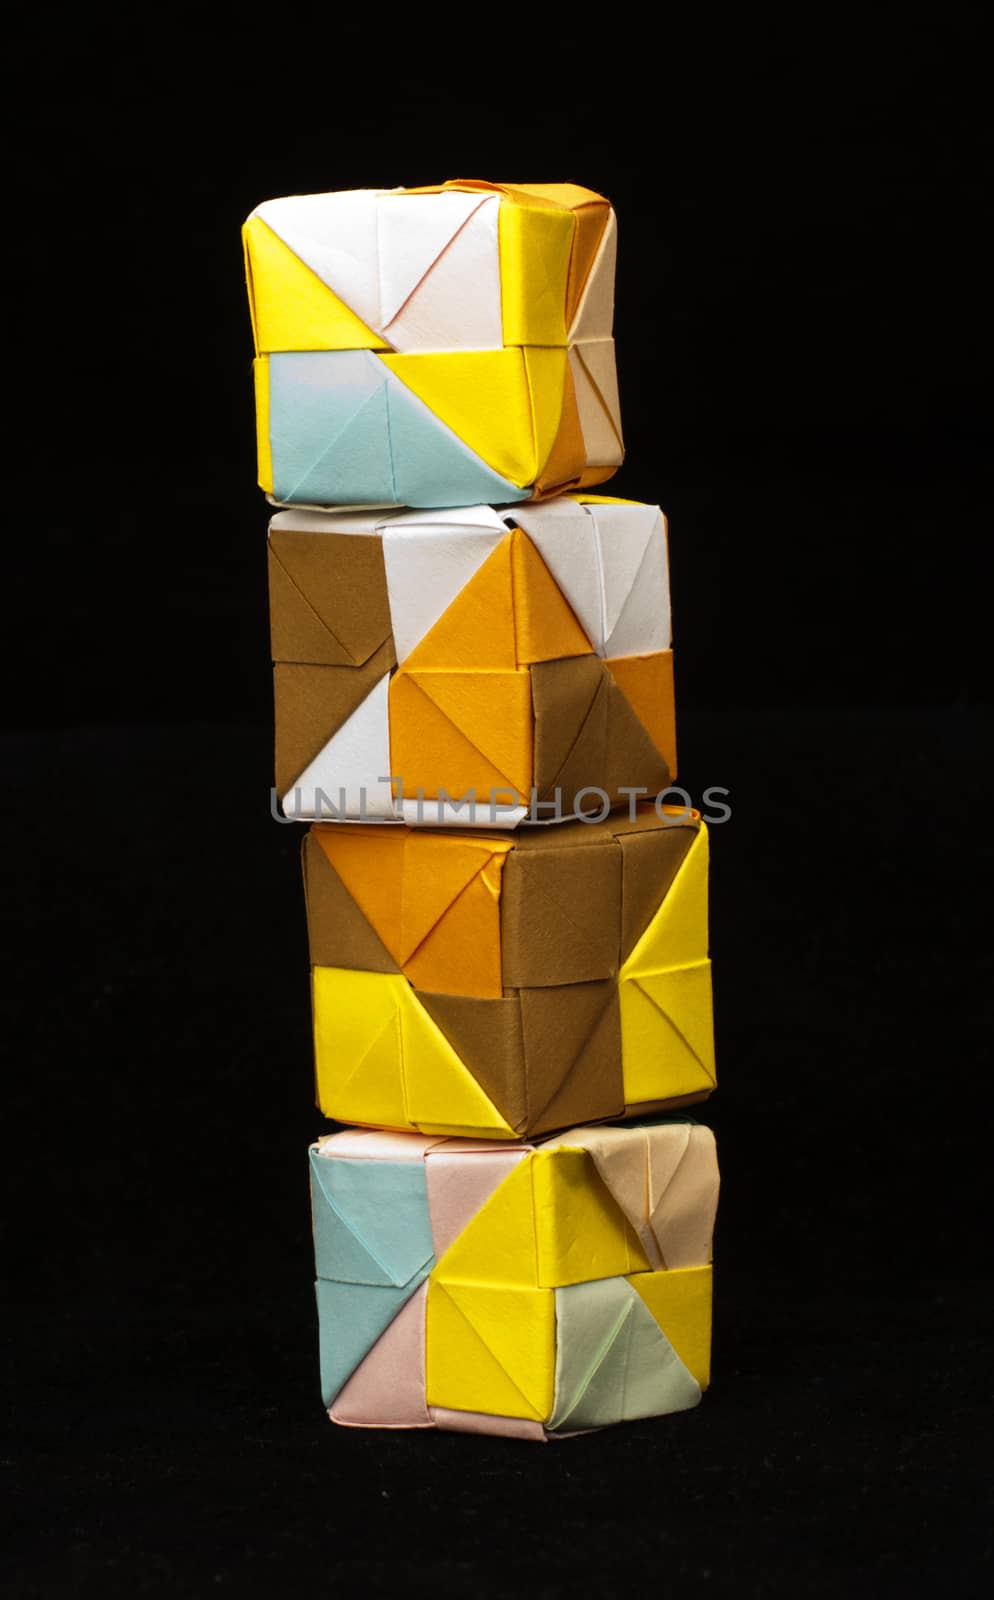 Paper made multi colored patterned cubes folded origami style.